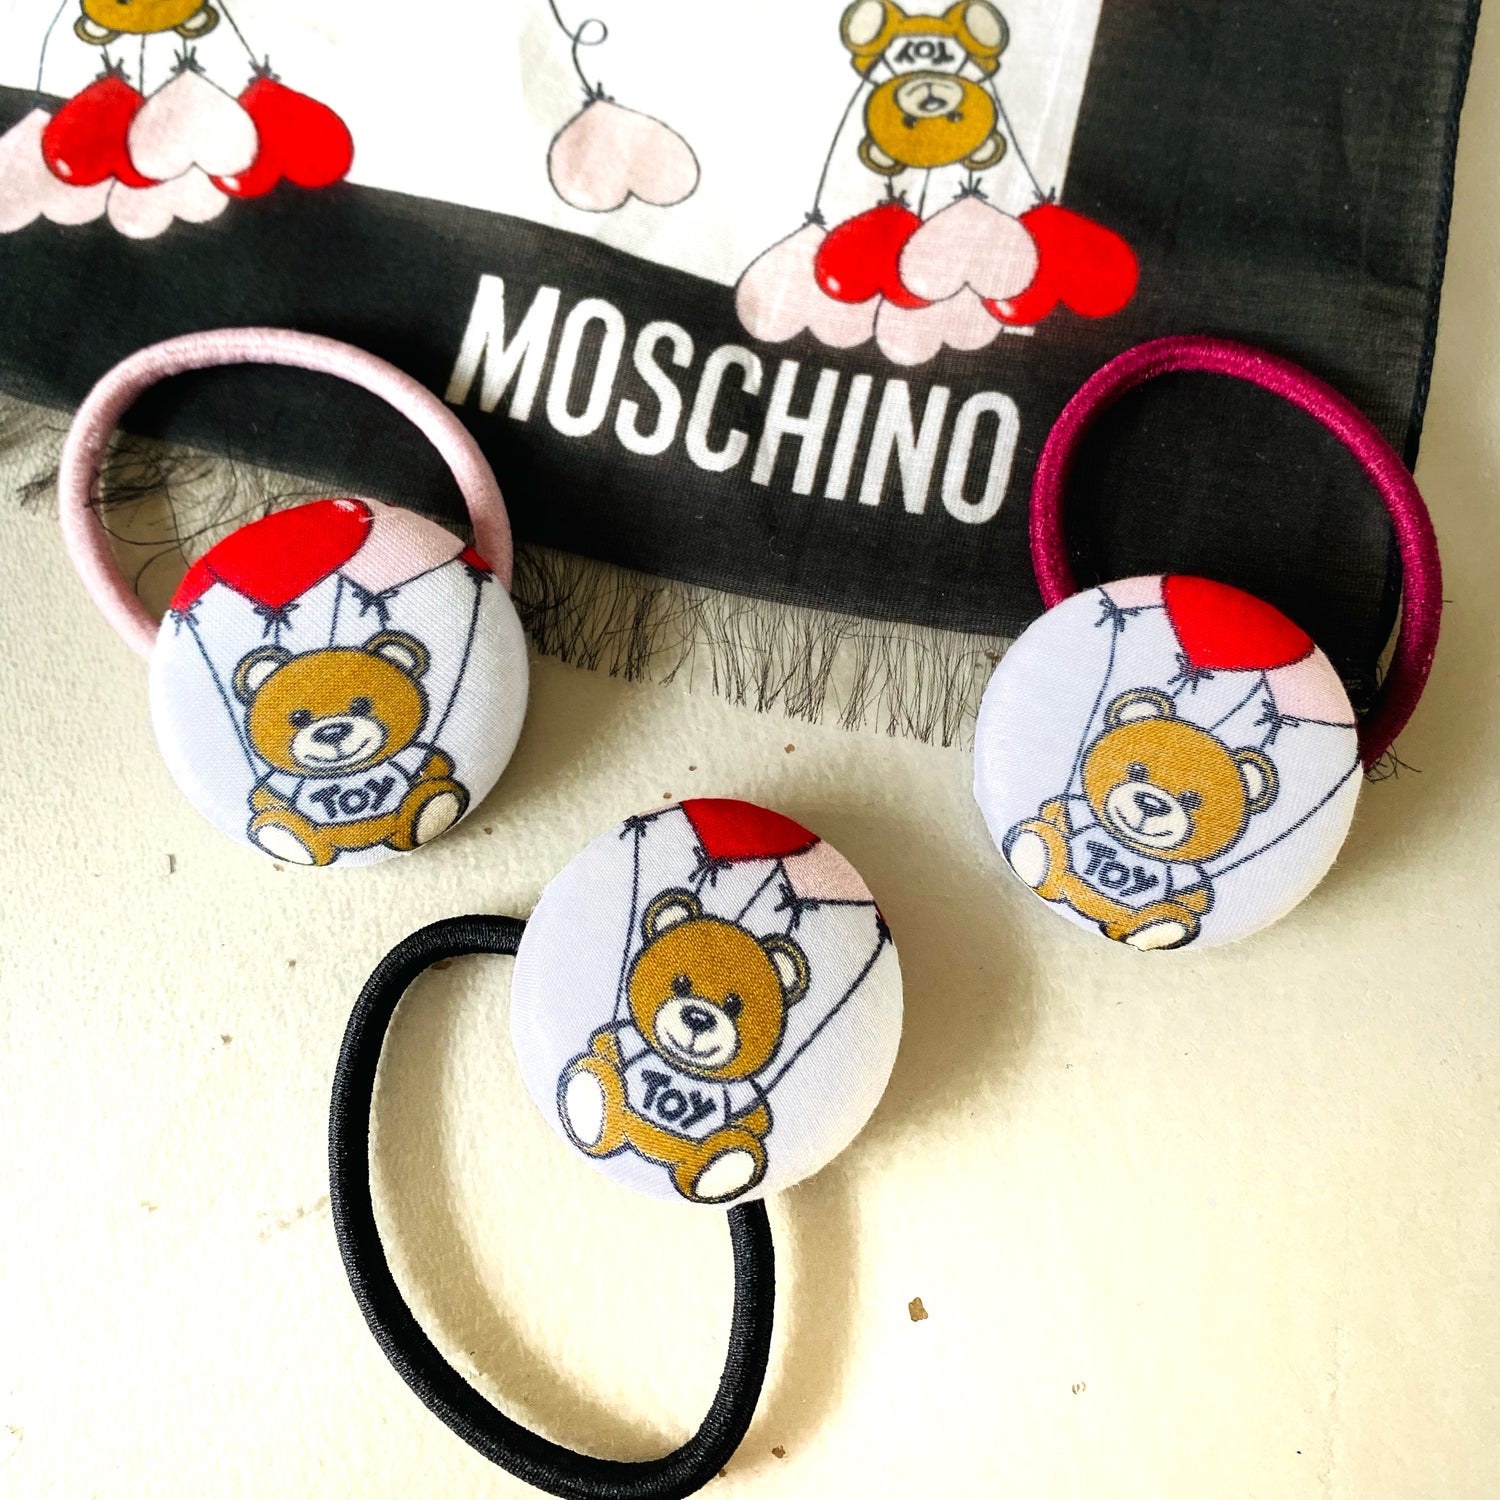 This Moschino bear is just too cute to say no..